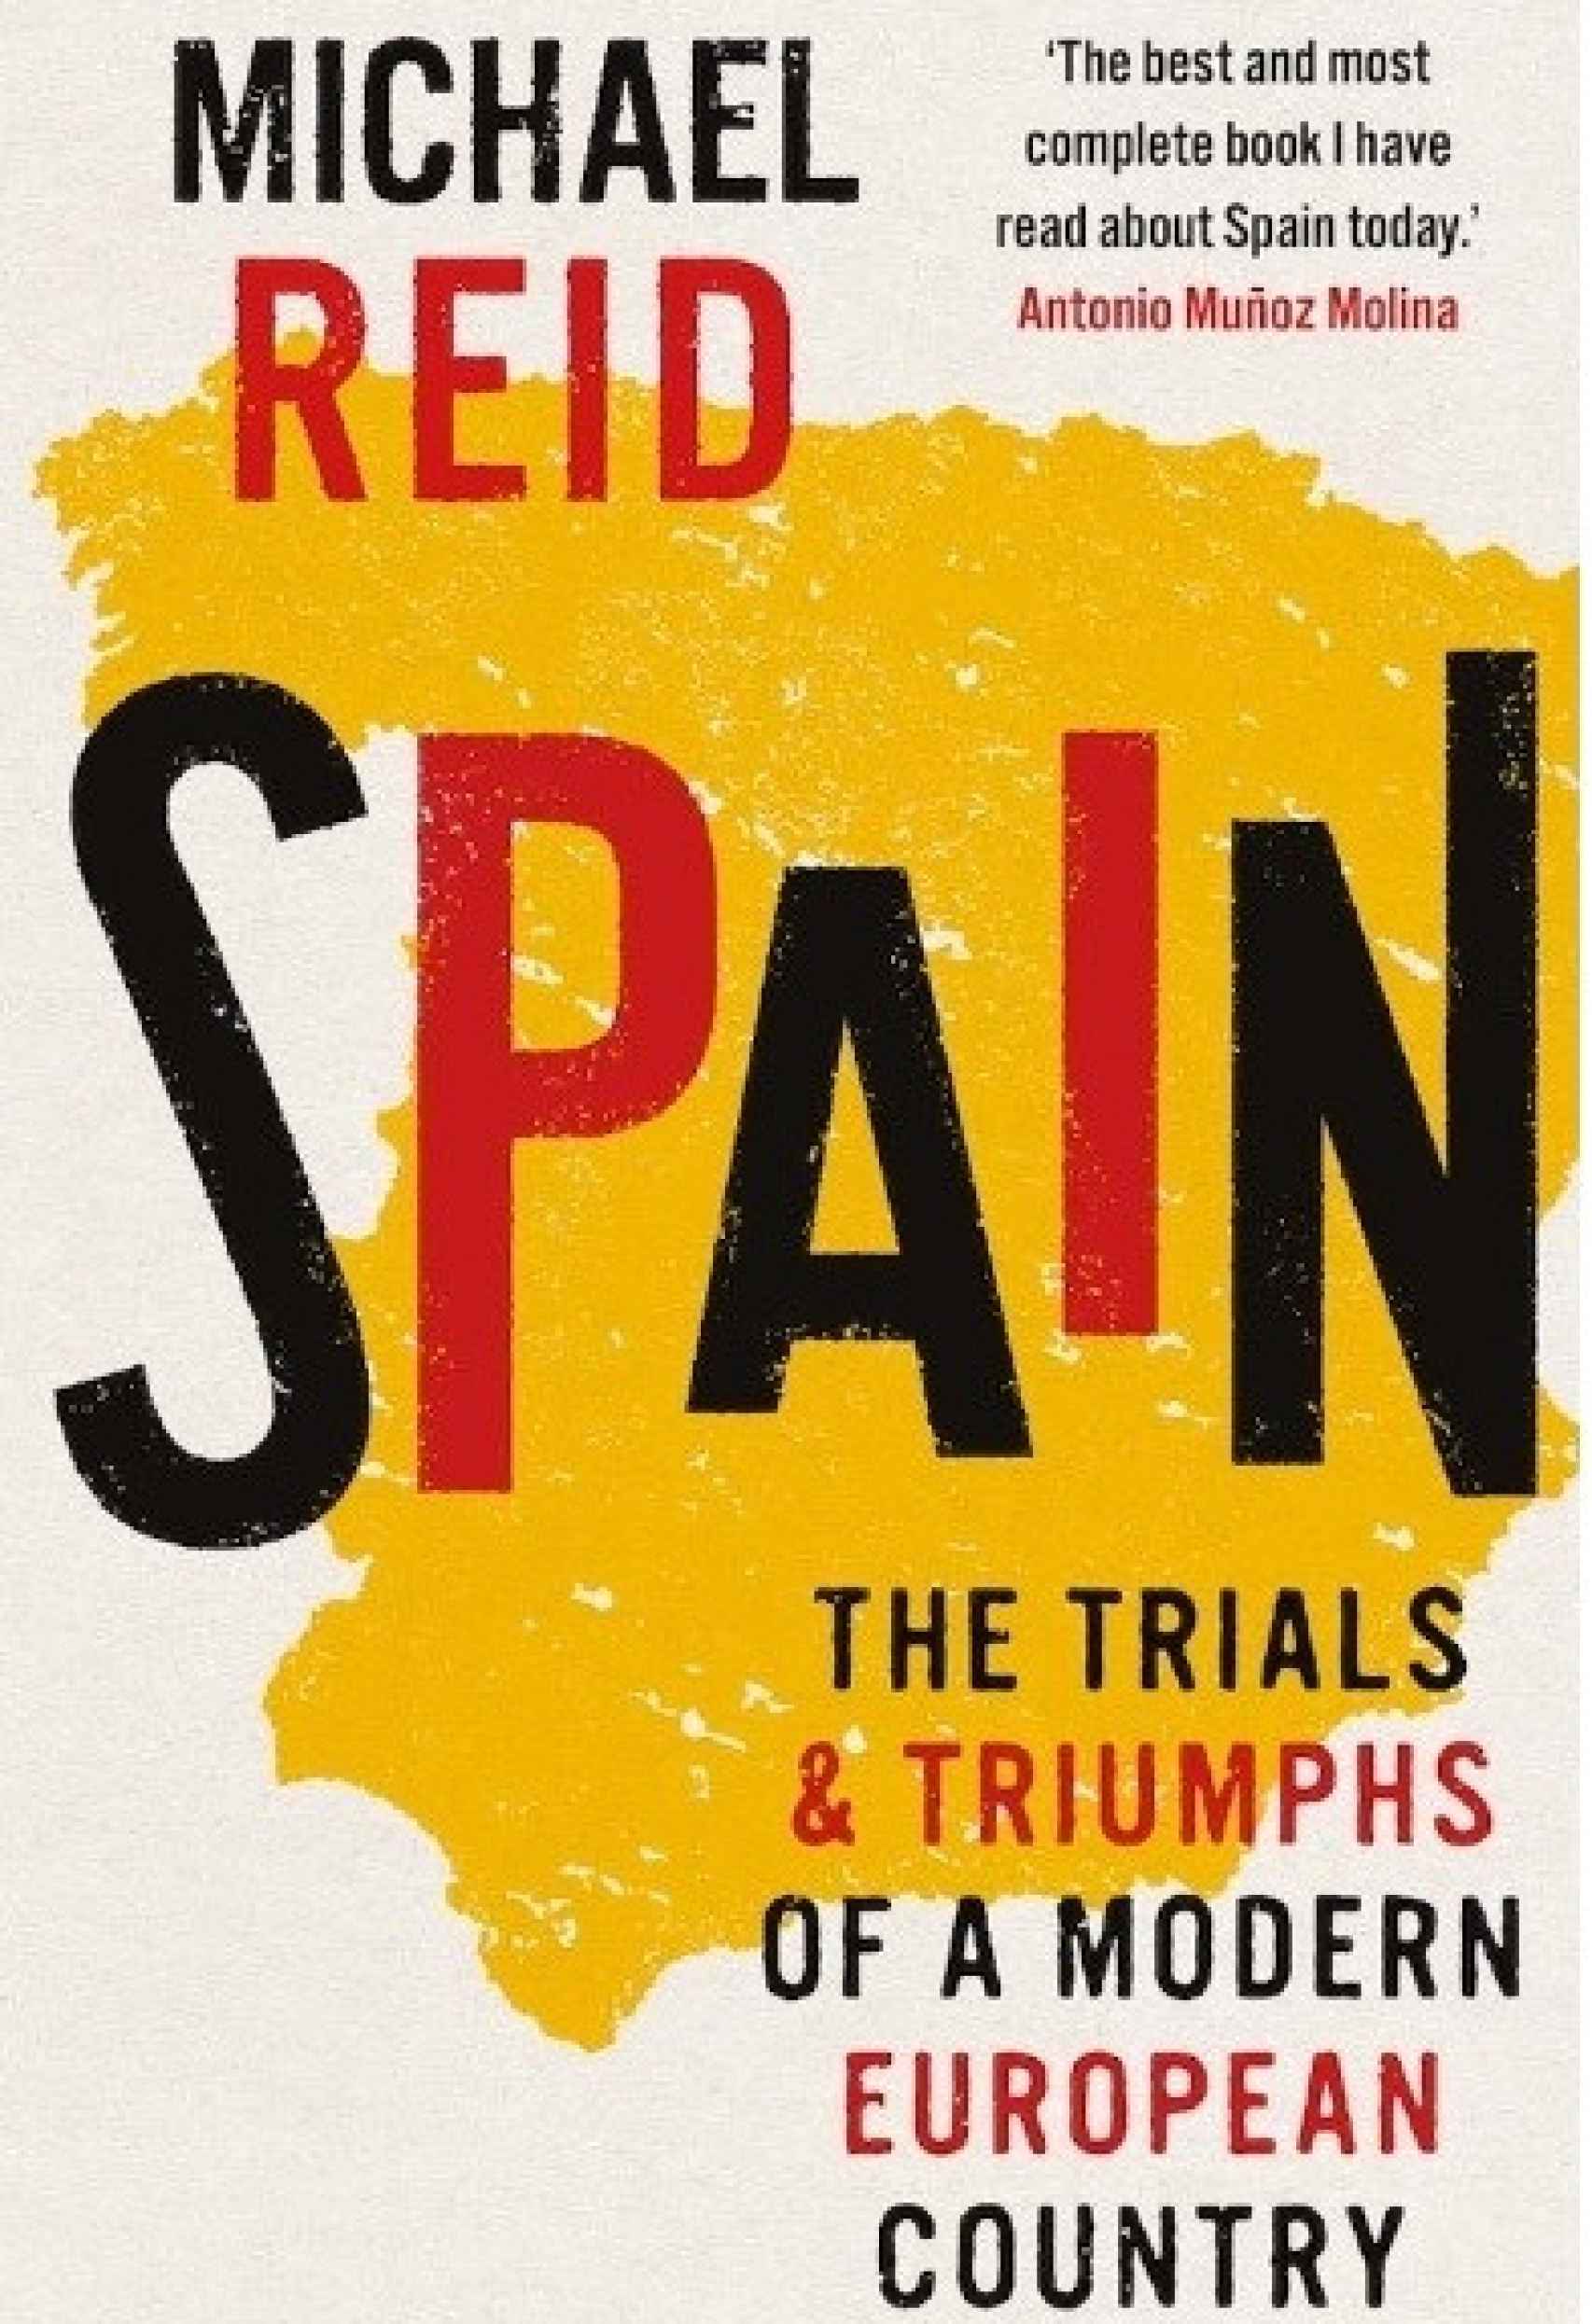 Spain: The trials and triumphs of a modern European country